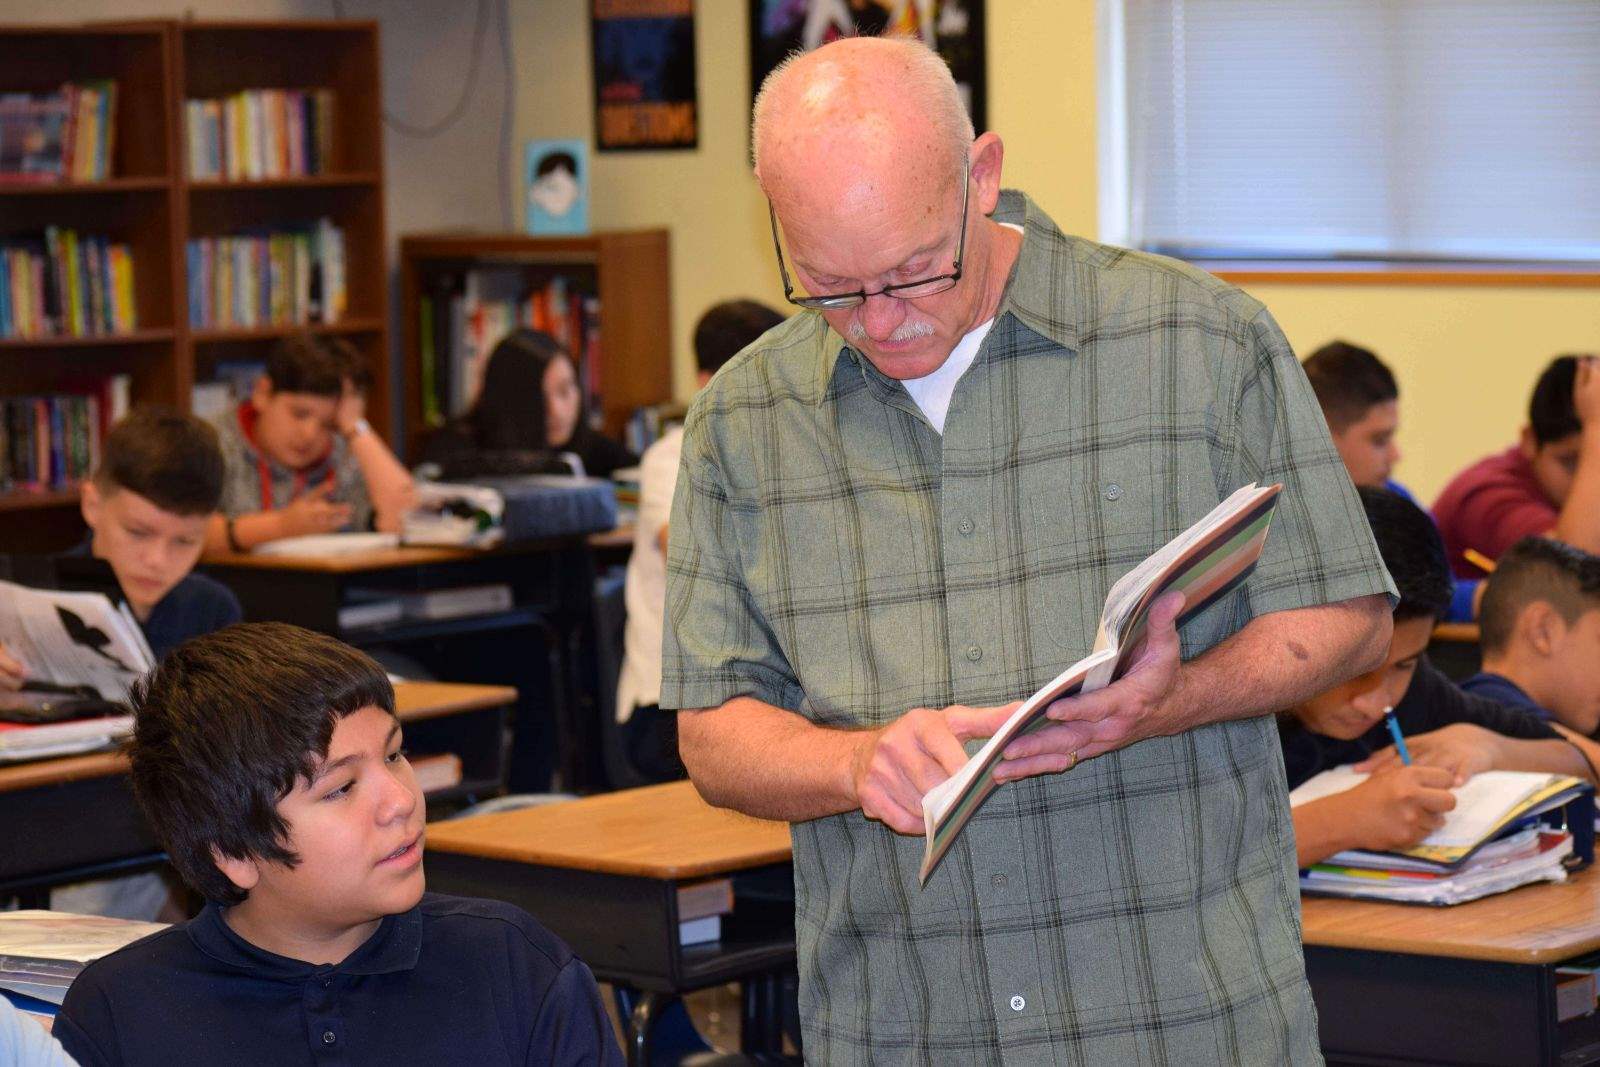 Encouraging young readers: Principal turned teacher inspires with current events